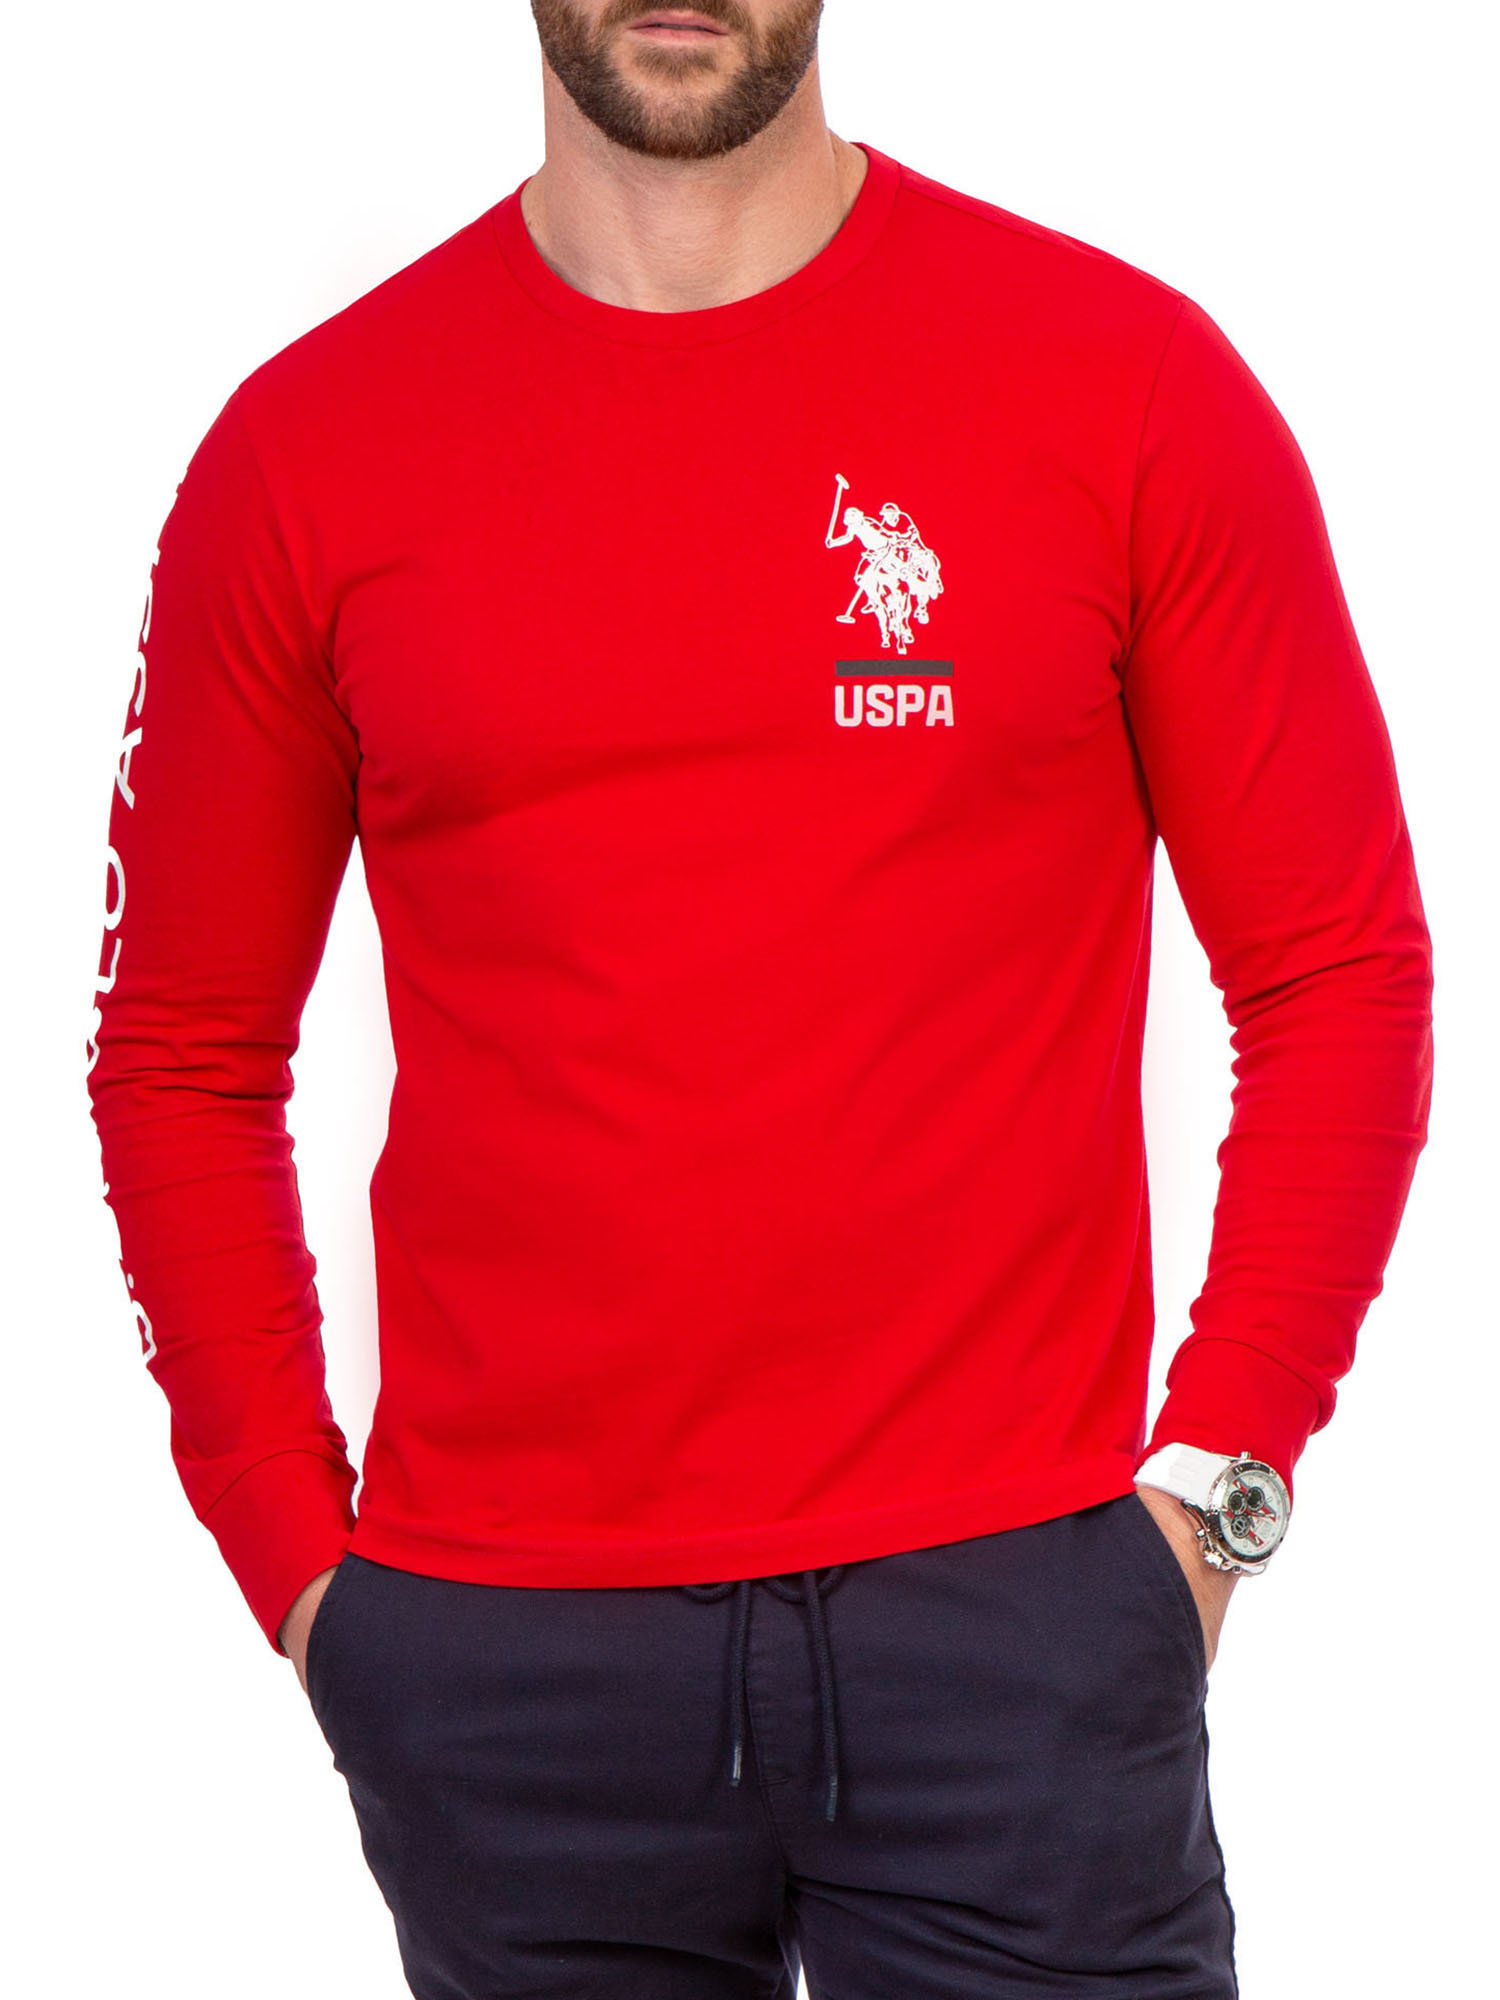 U.S. Polo Assn. Men's and Big Men's Long Sleeve Graphic T-Shirt - image 1 of 7